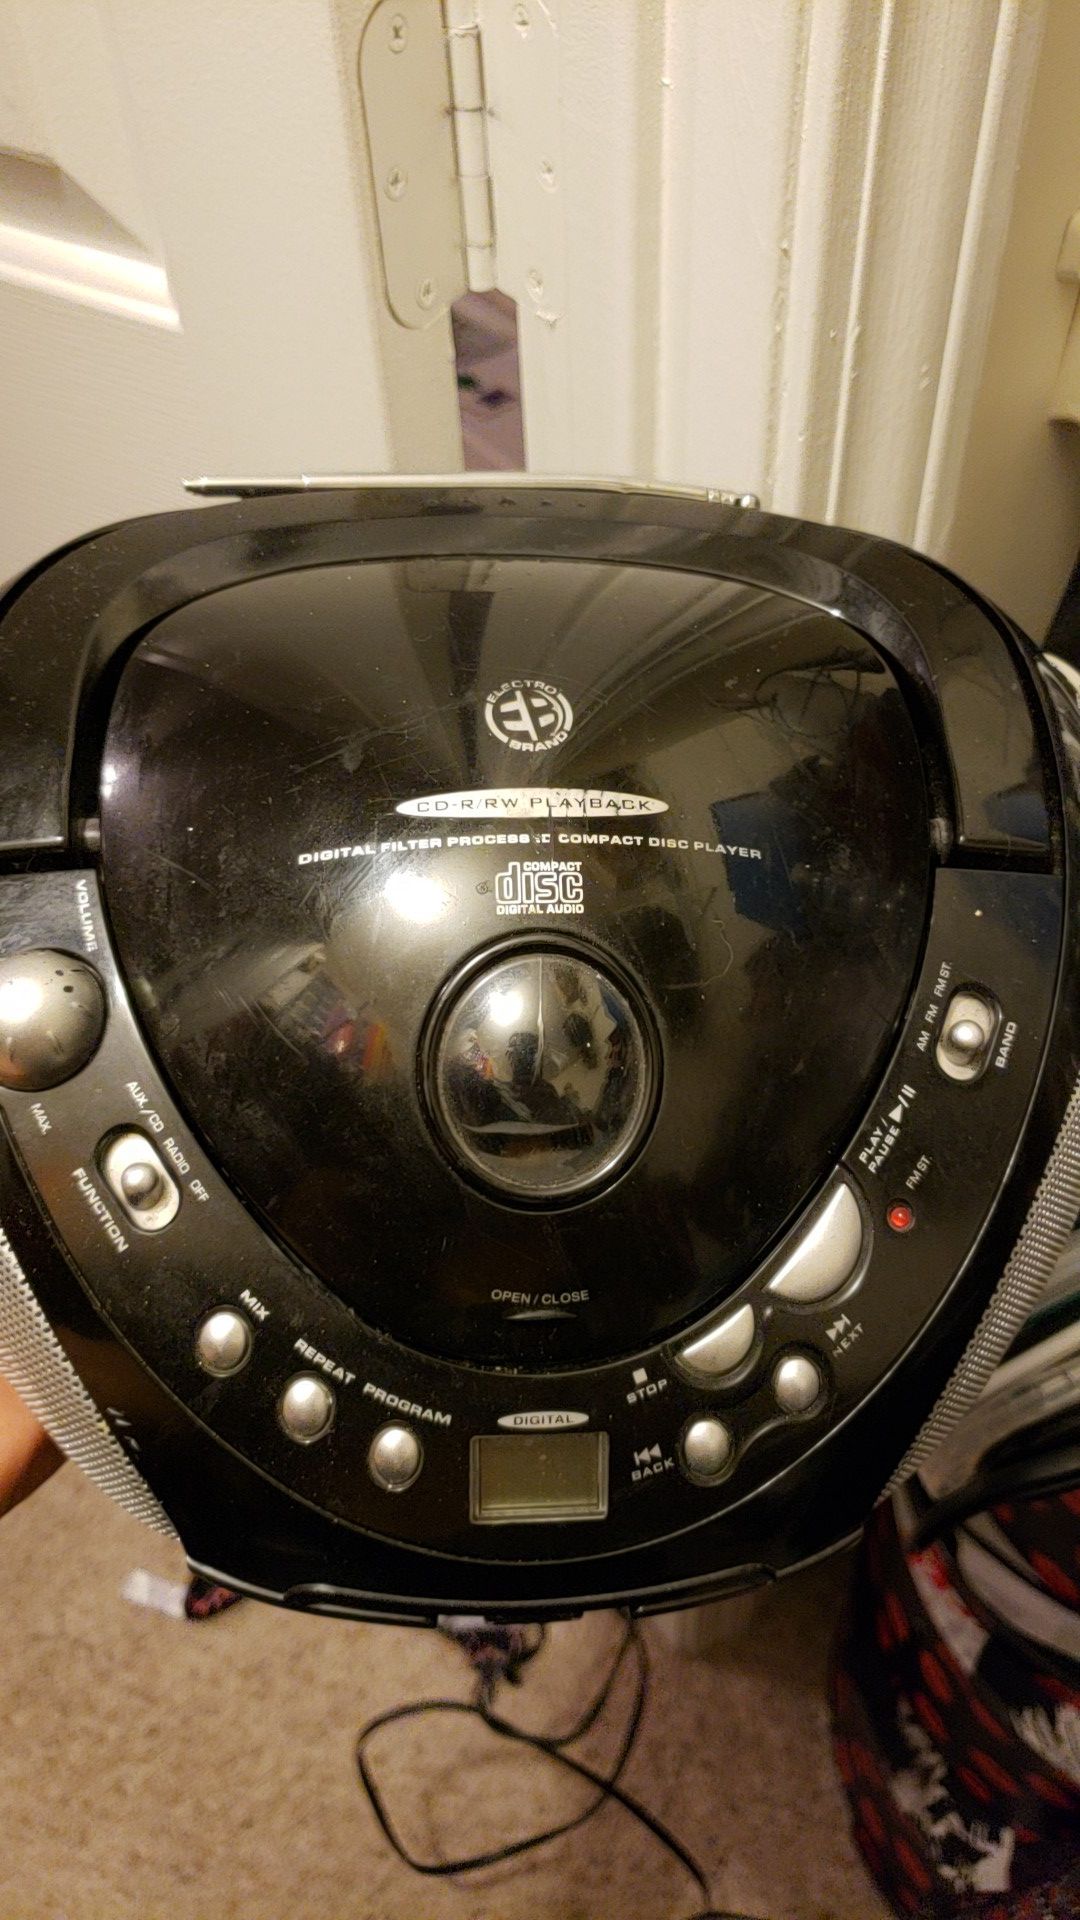 CD player with radio